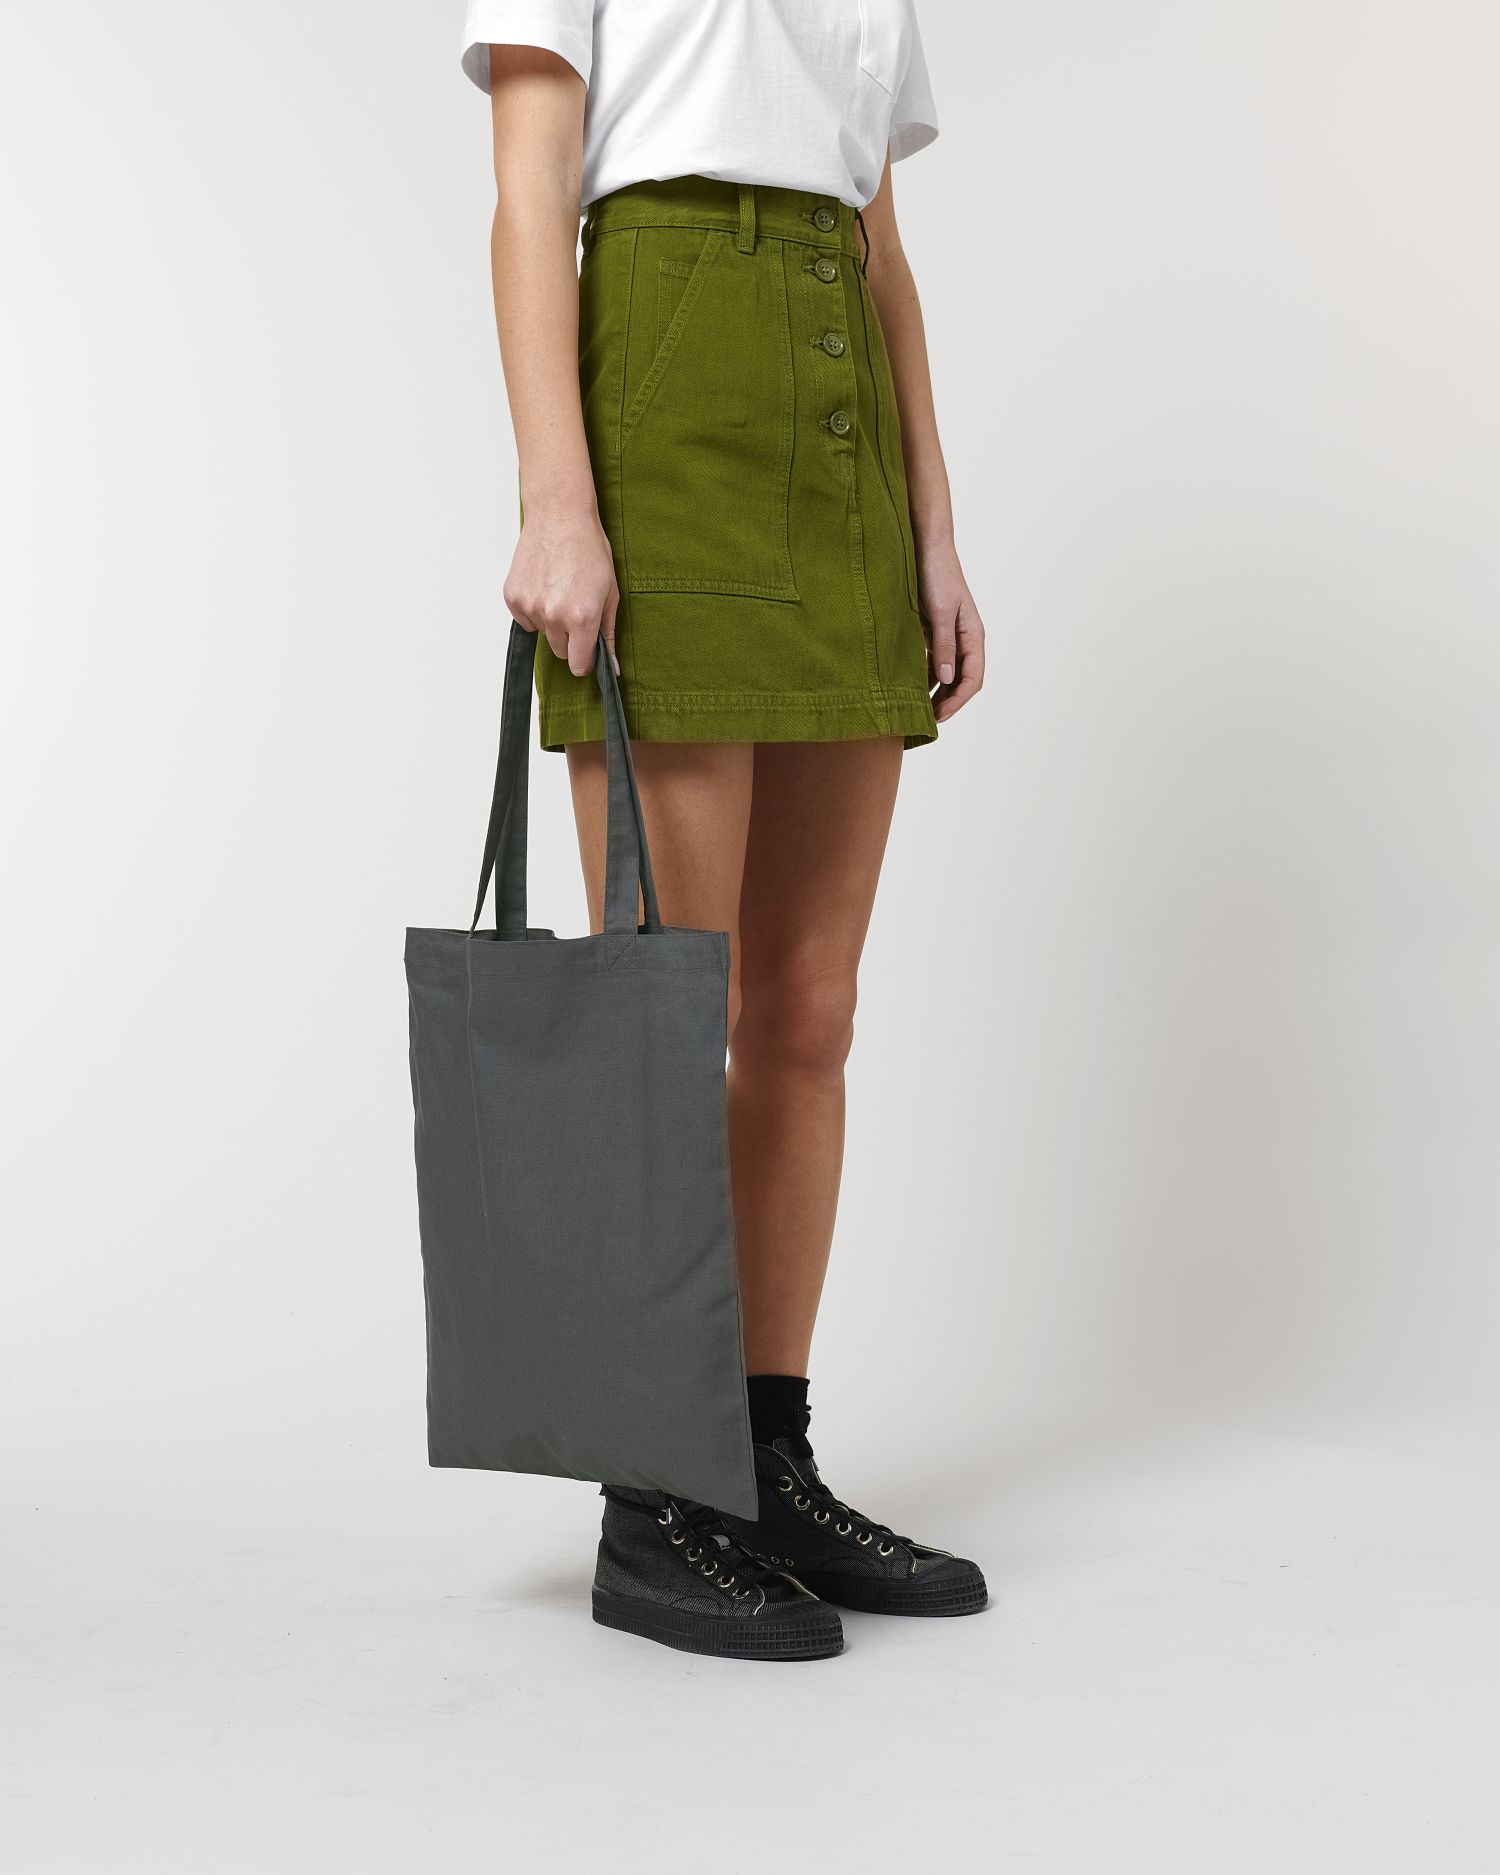  Light Tote Bag in Farbe Anthracite